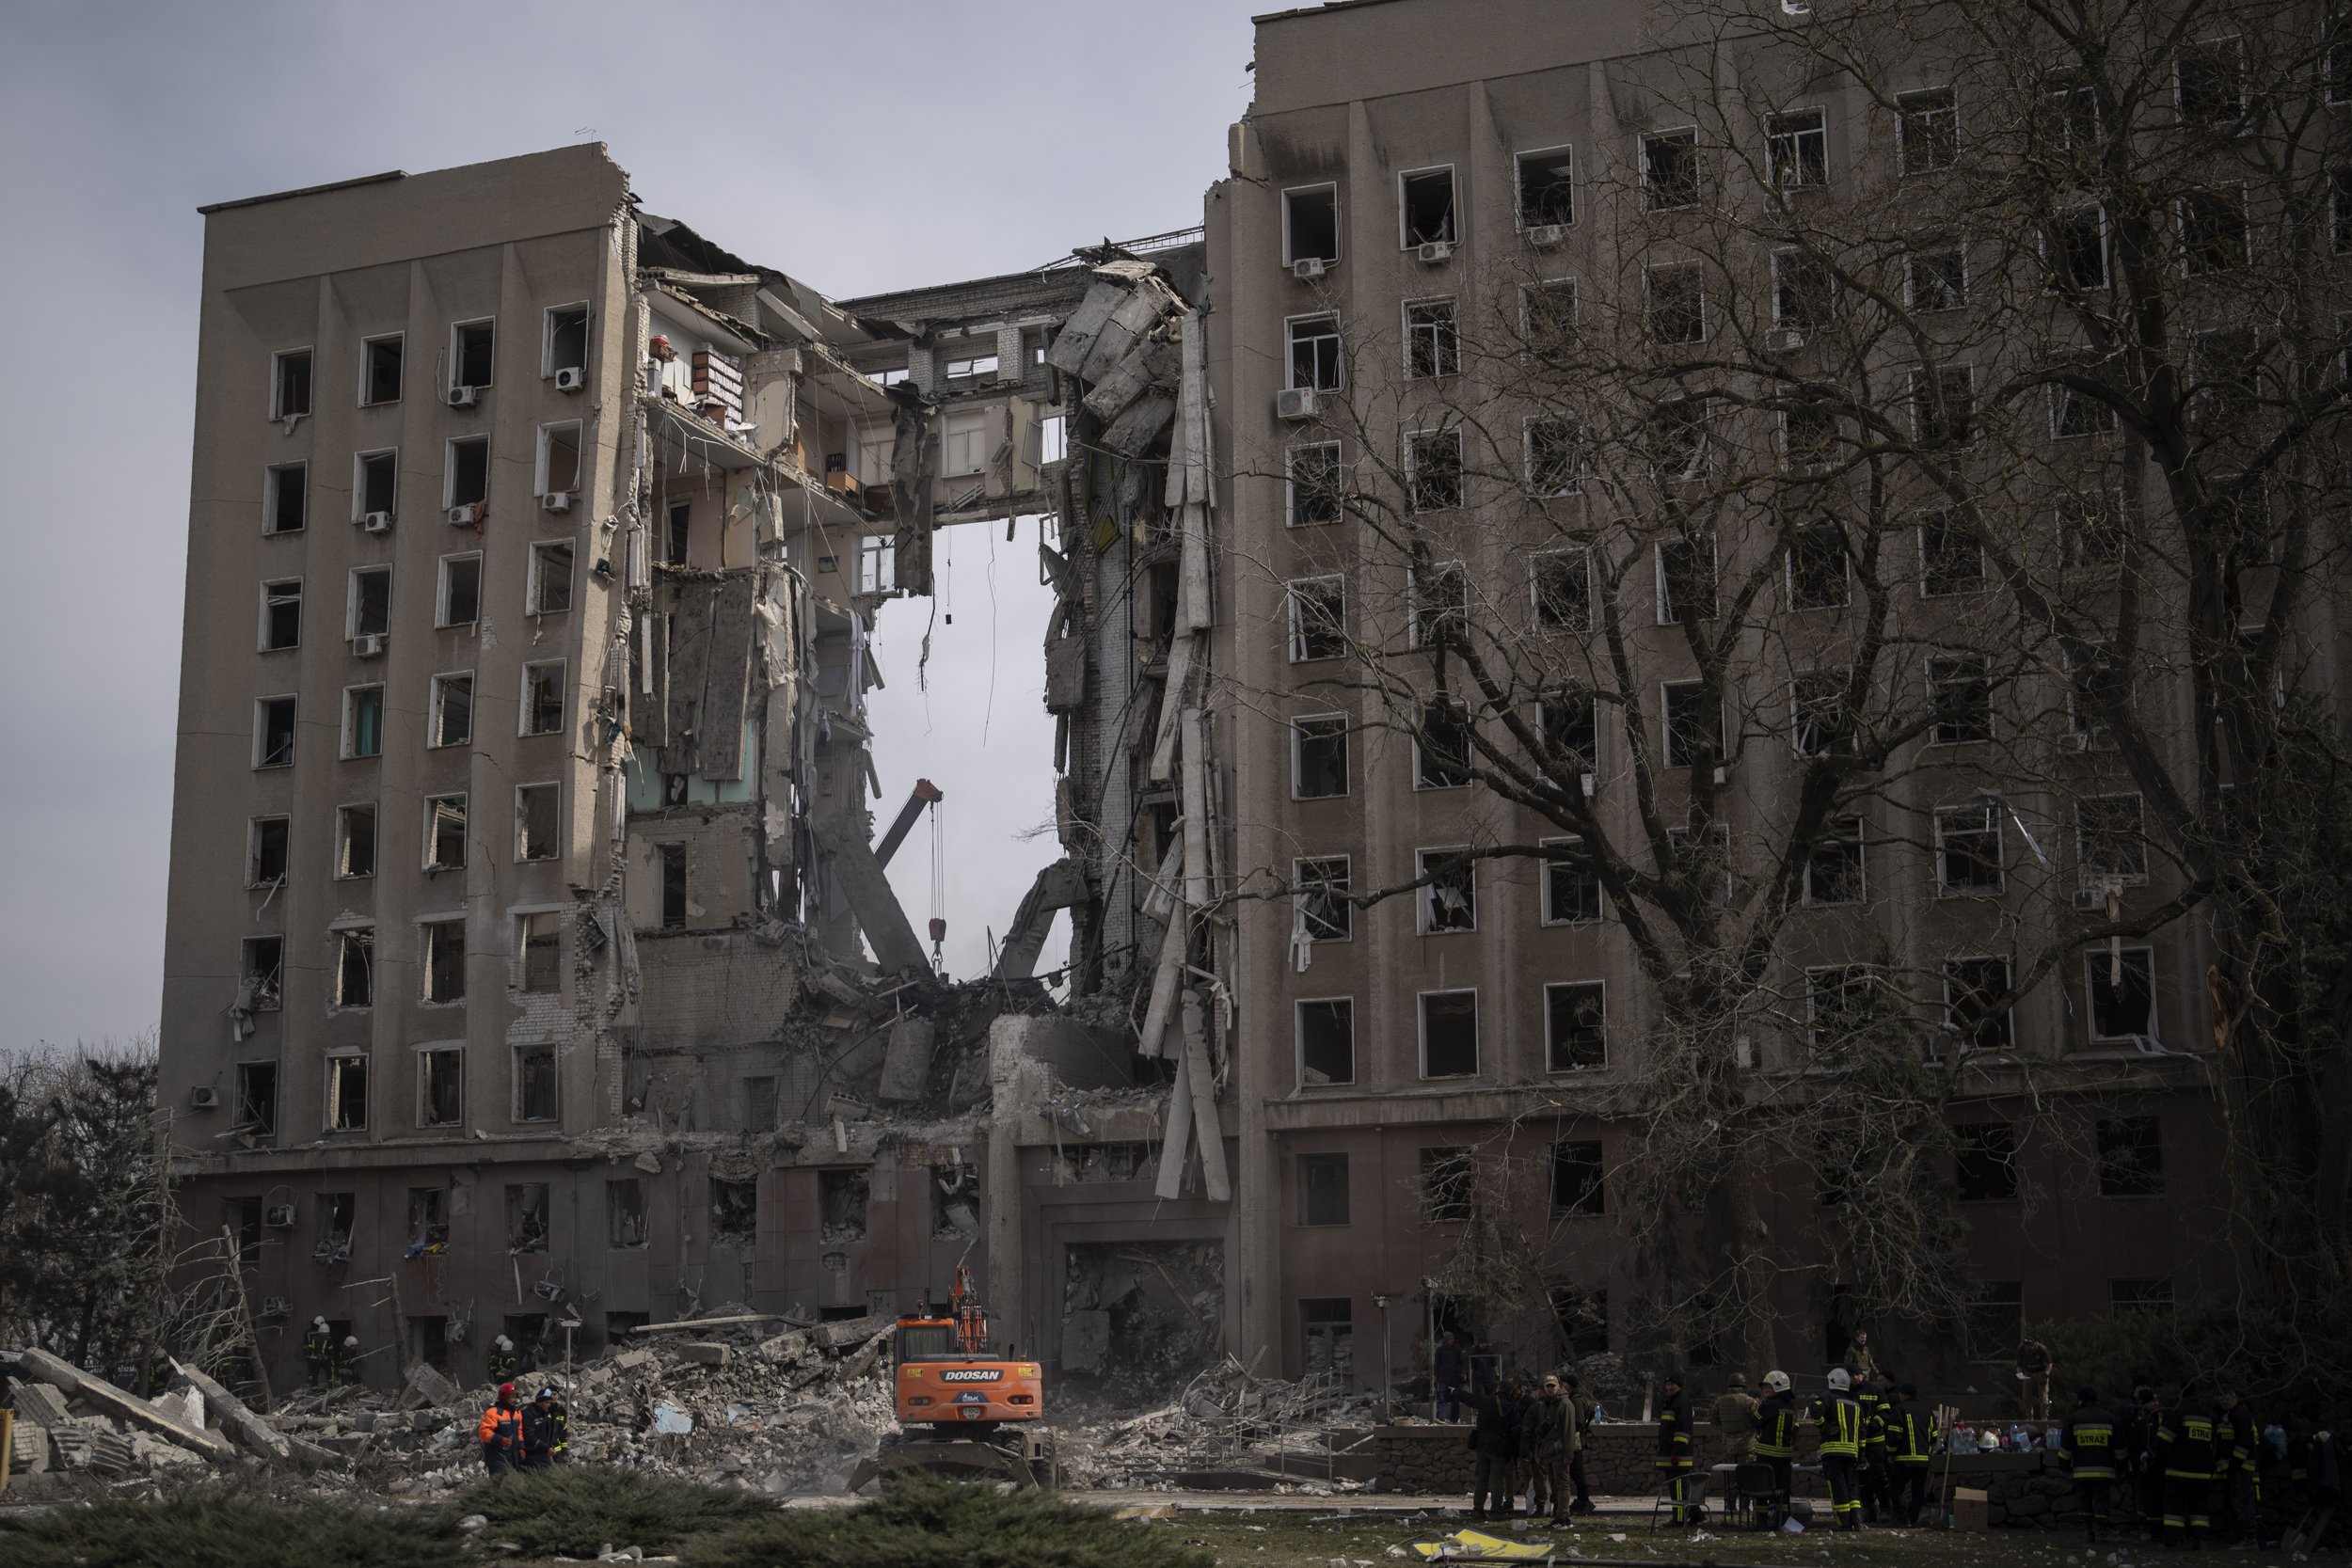  Emergency personnel work at the site of the regional government headquarters of Mykolaiv, Ukraine, following a deadly Russian attack, on Tuesday, March 29, 2022. (AP Photo/Petros Giannakouris) 